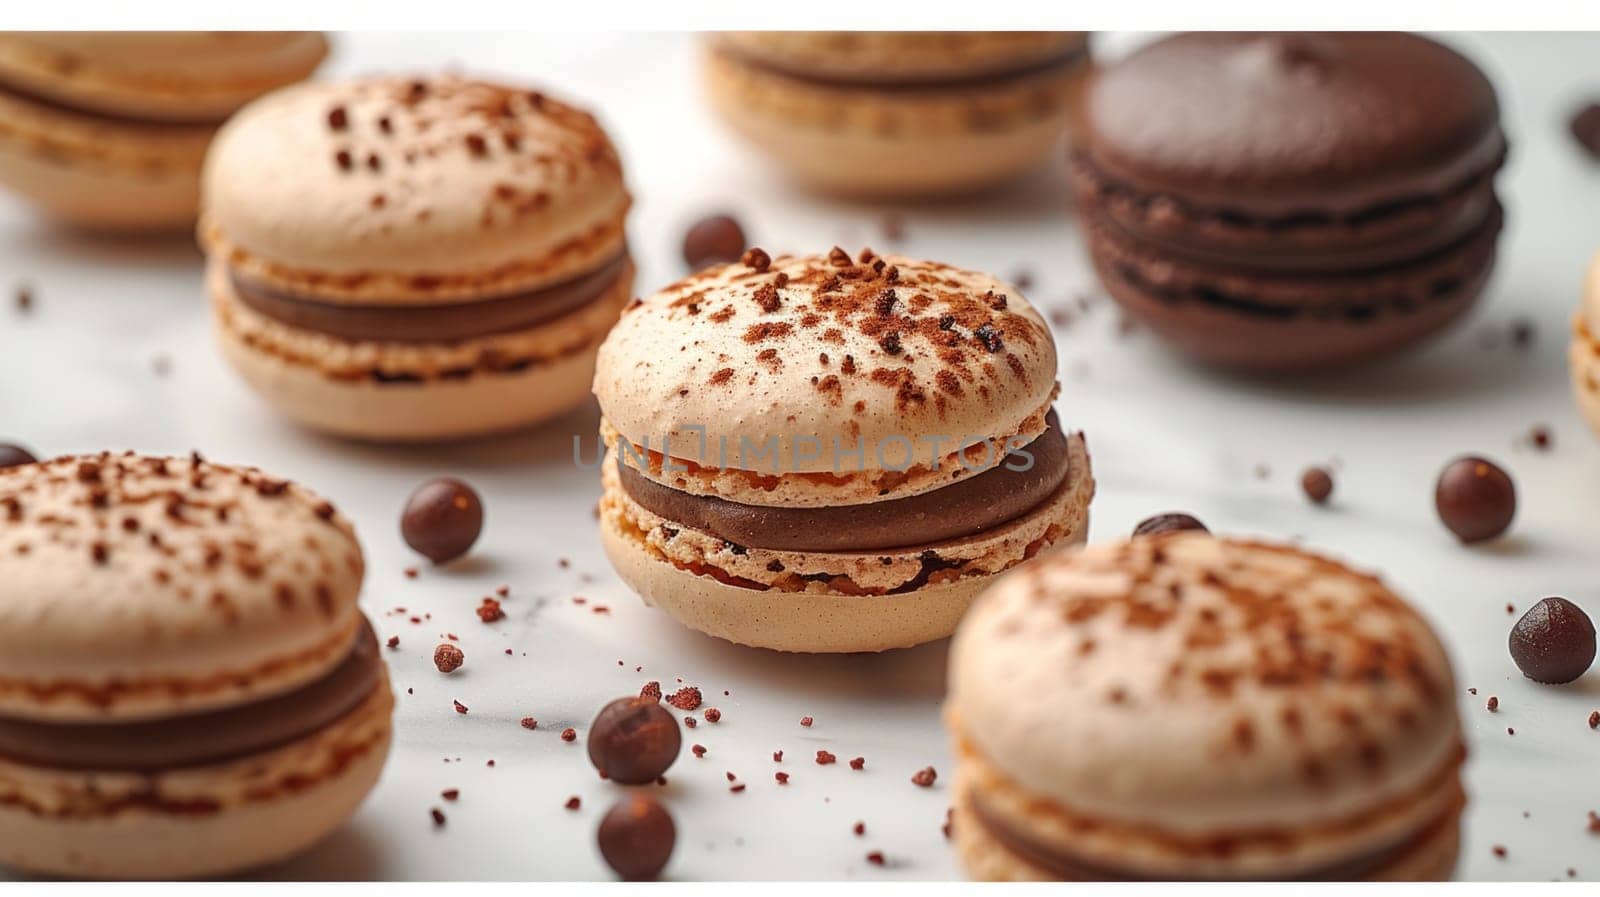 Close up view of coffee and chocolate macarons on white background.